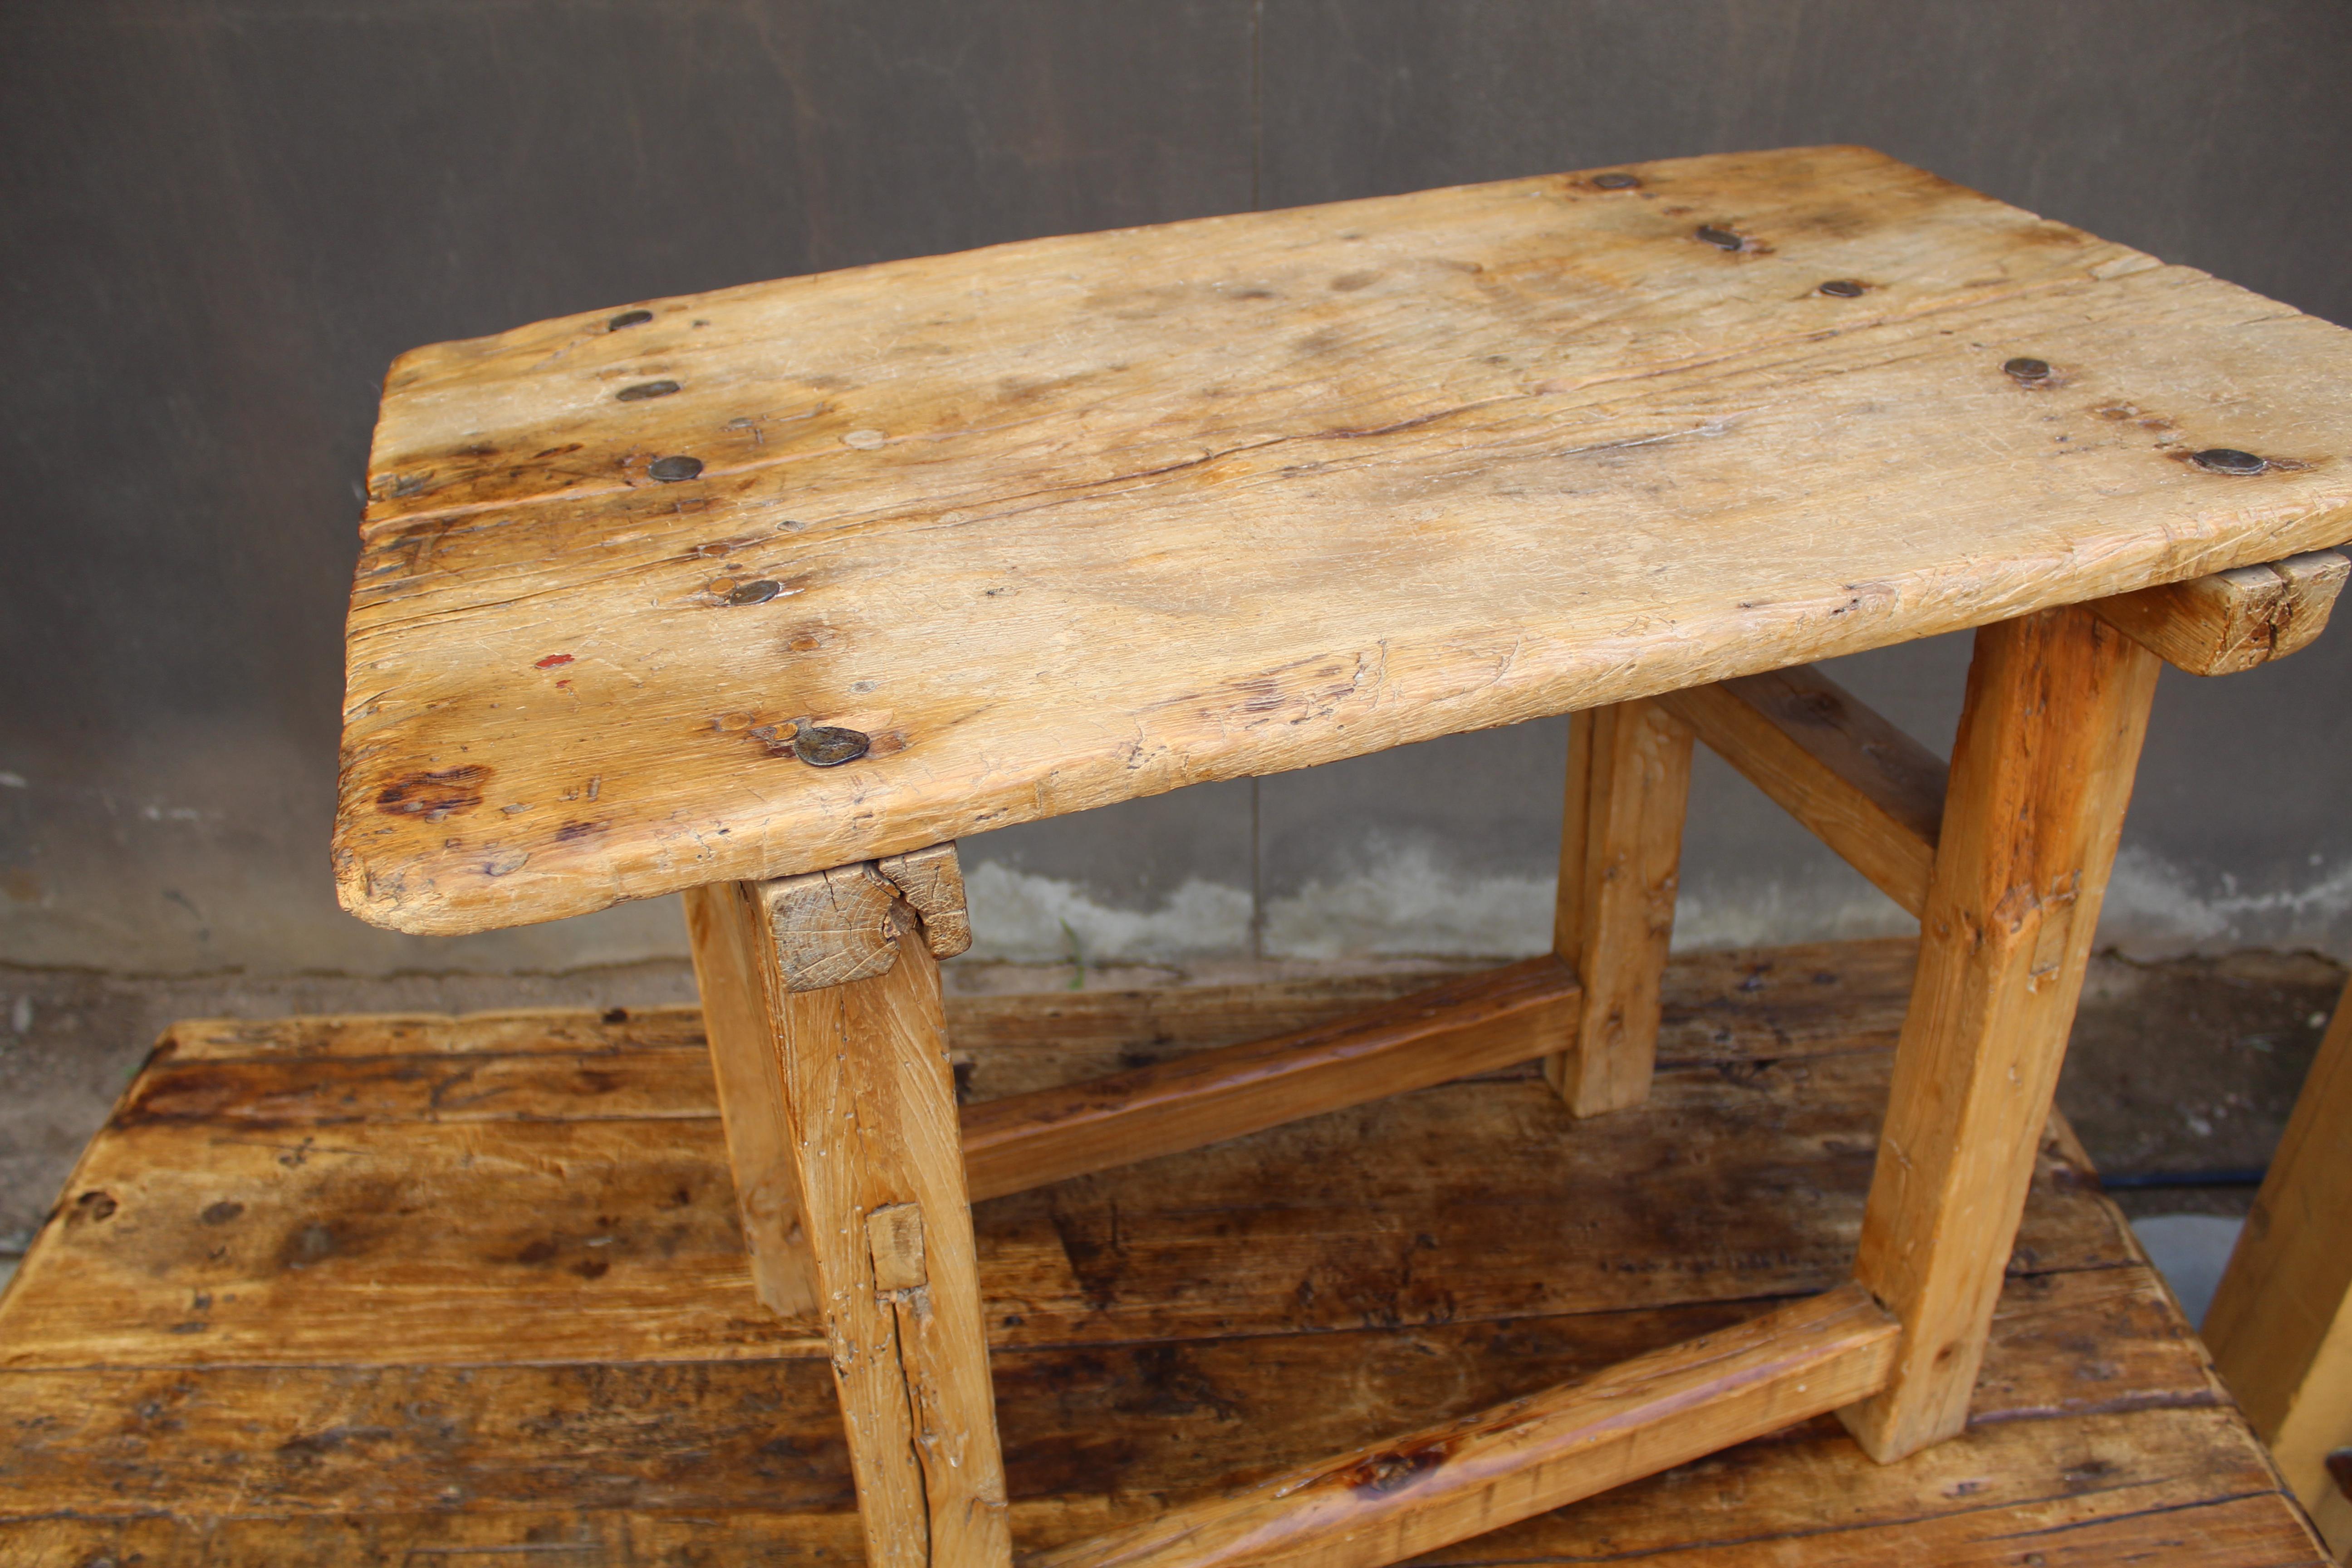 Solid Sabino wood work table. It is rare to find this table with both top and base in sabino. Hand forged iron nails. This table has a beautiful patina from age and use. Mexico.